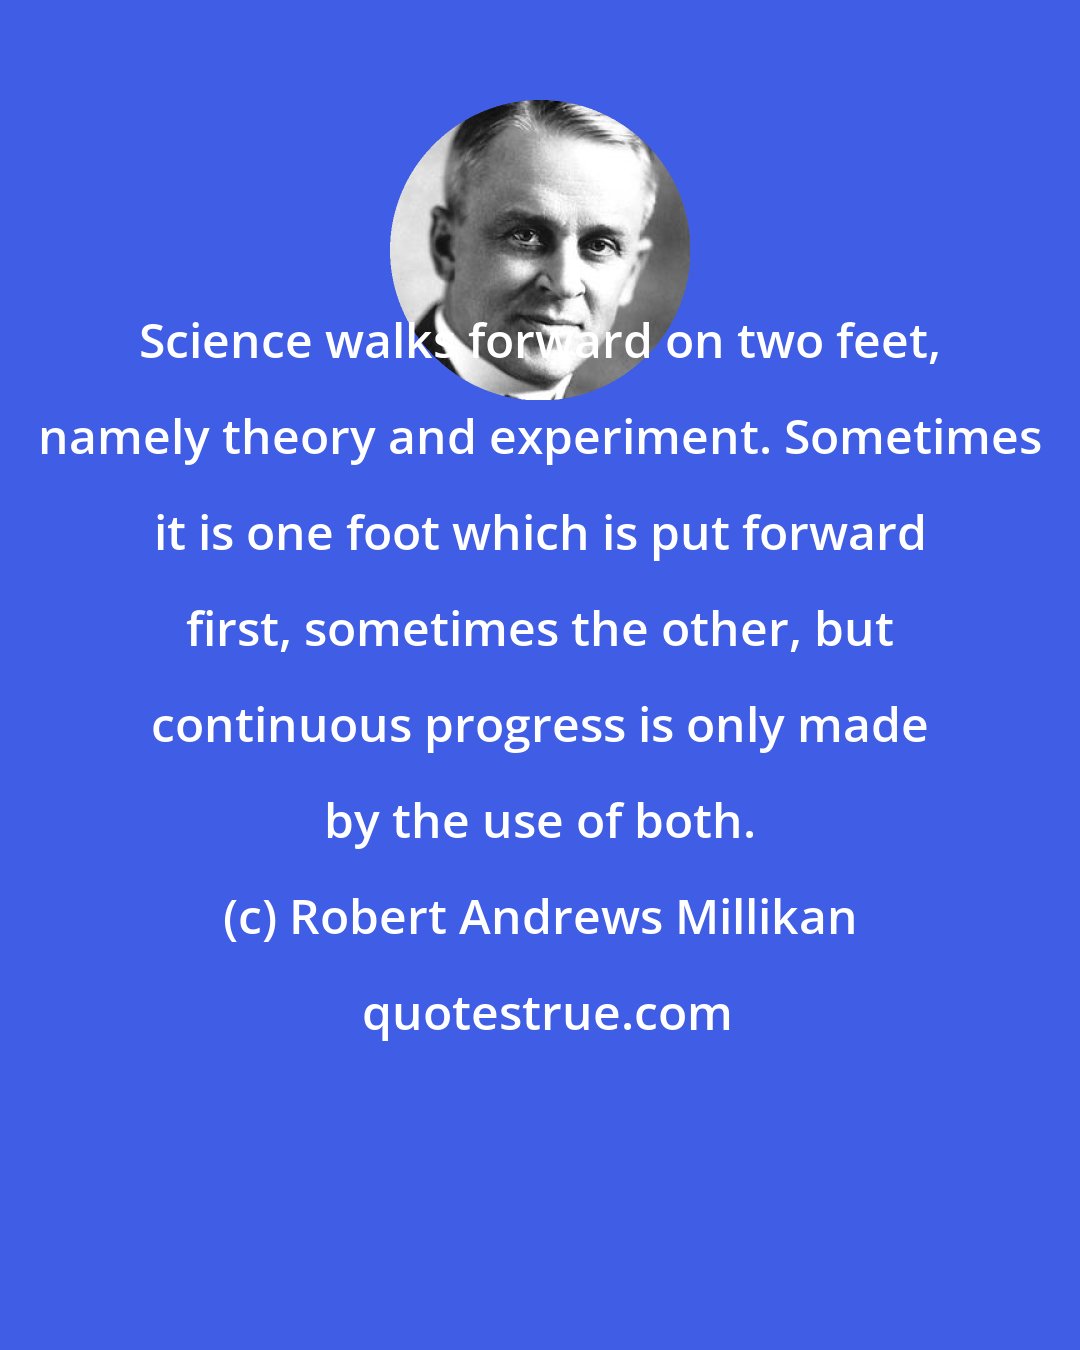 Robert Andrews Millikan: Science walks forward on two feet, namely theory and experiment. Sometimes it is one foot which is put forward first, sometimes the other, but continuous progress is only made by the use of both.